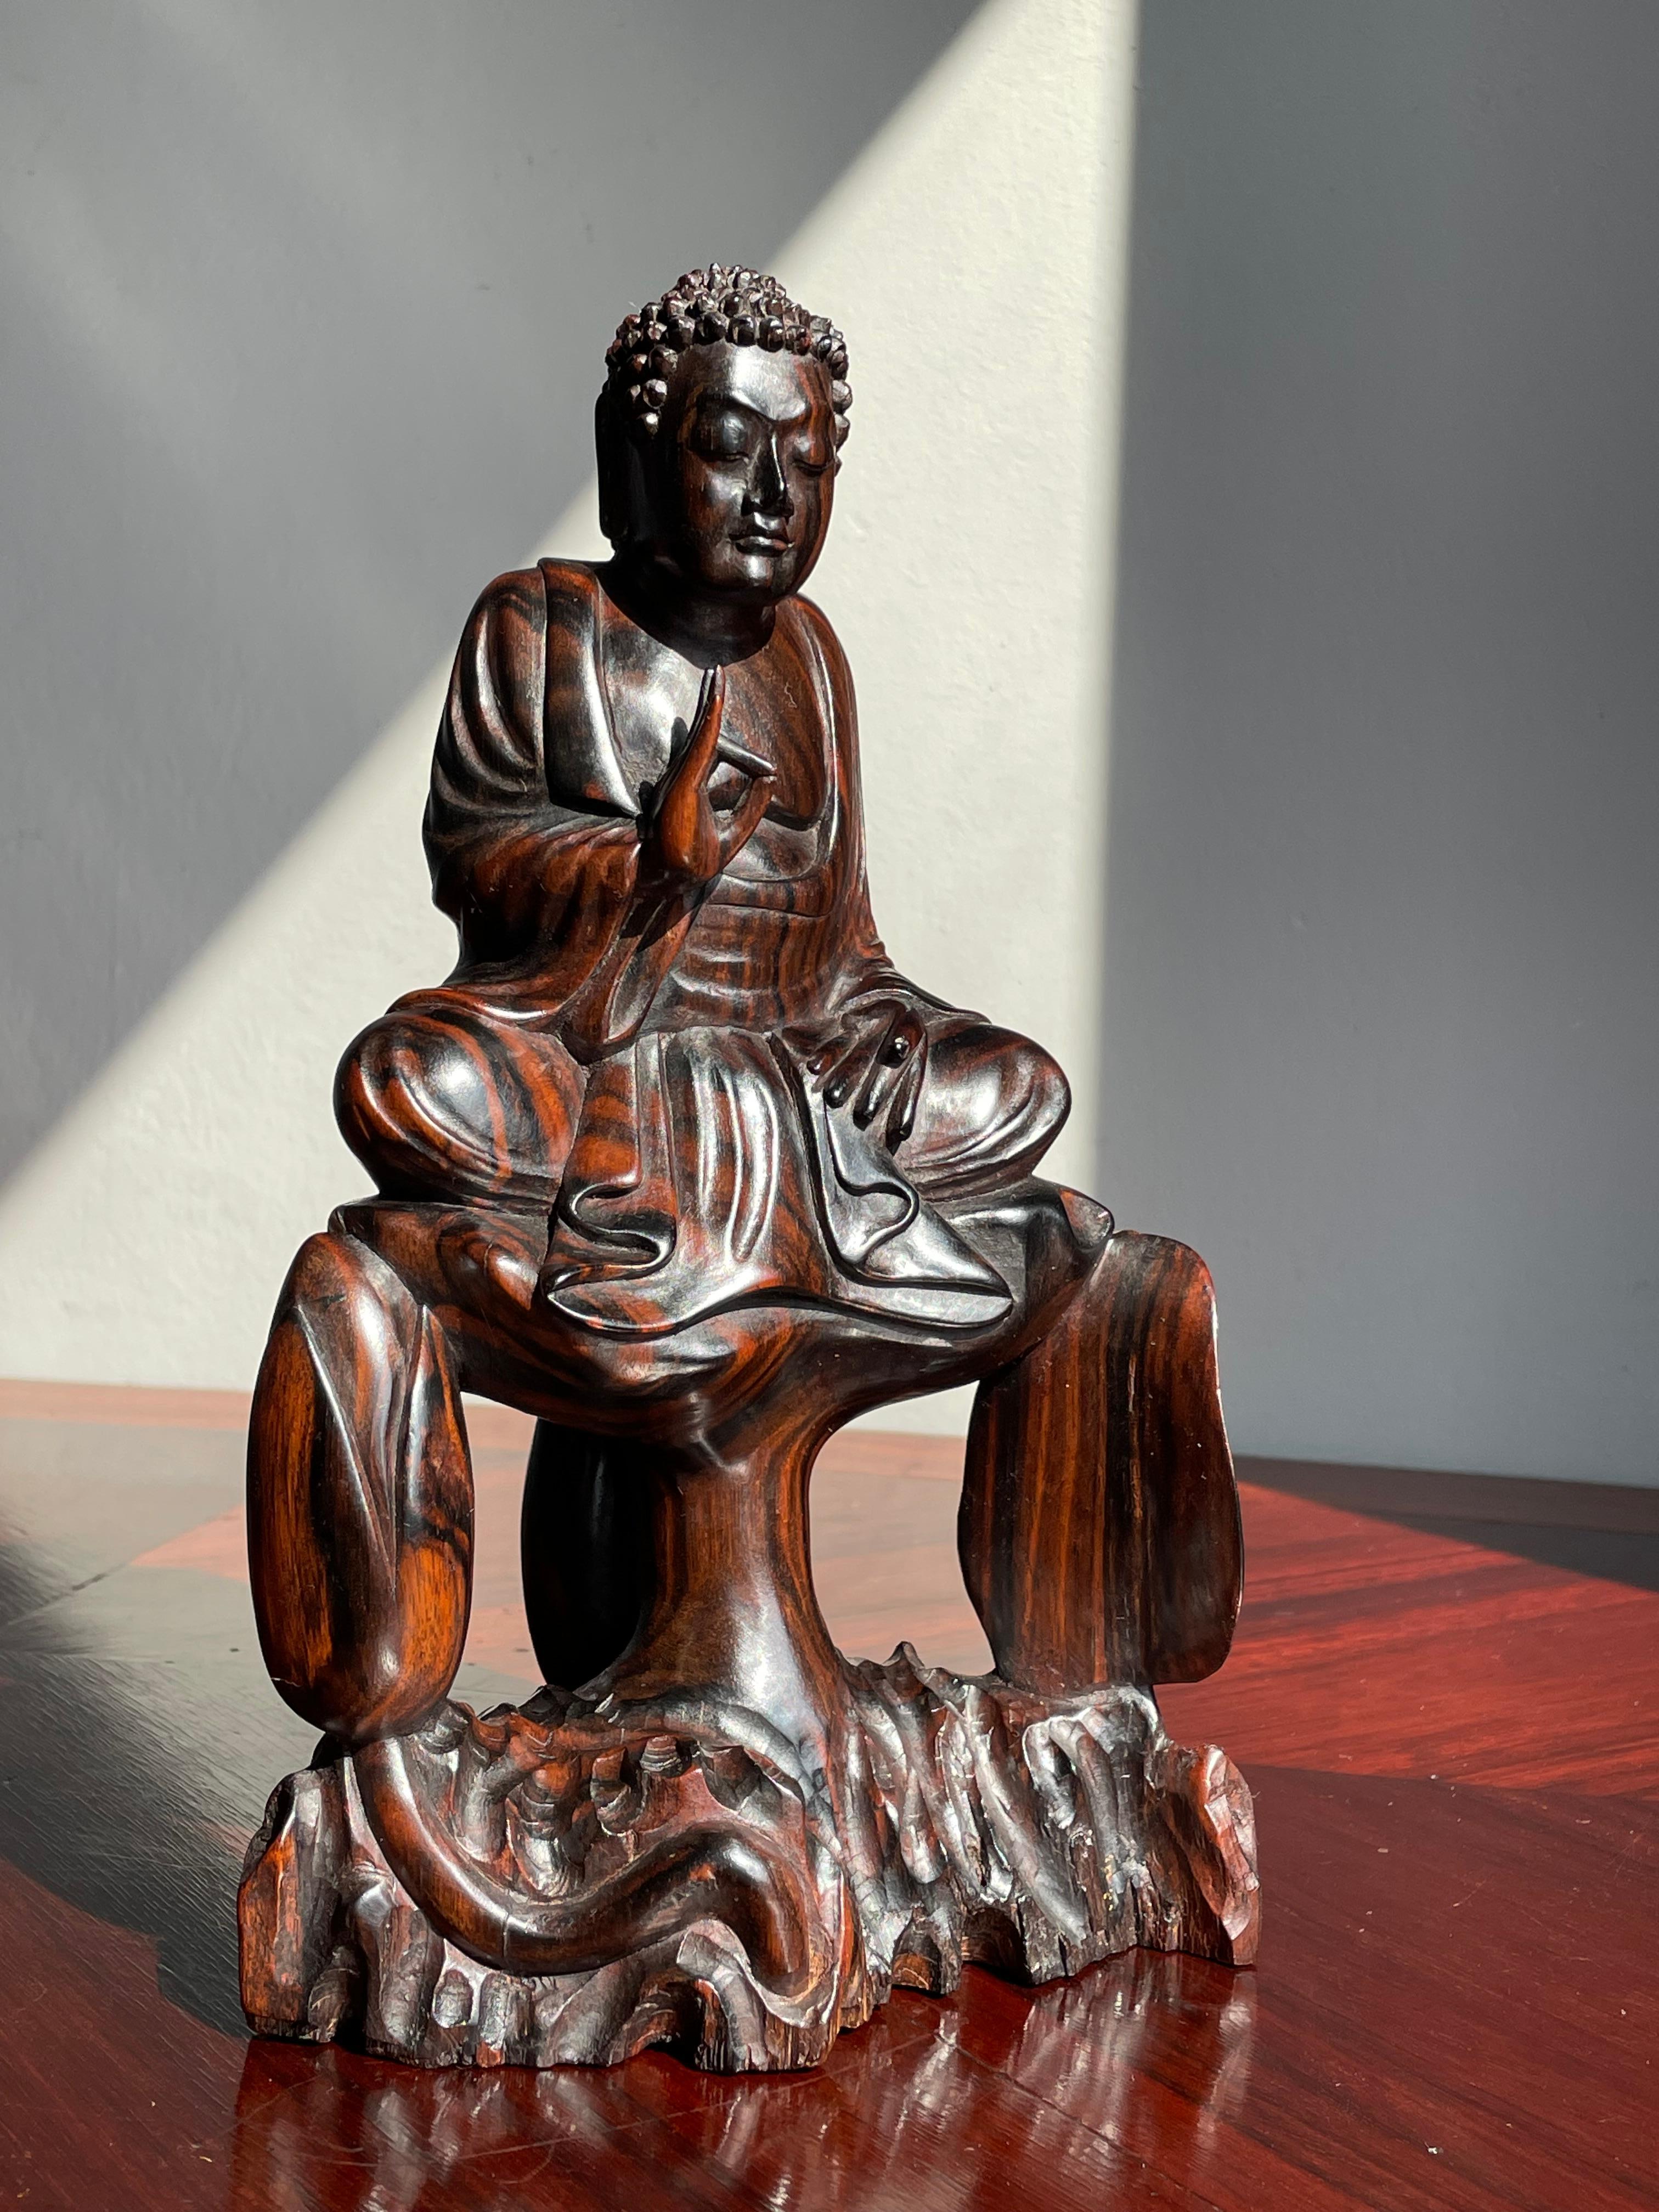 Unique on the worldwide web.

This beautifully excecuted sitting Buddha of infinate light is entirely handcarved out of one stunning piece of coromandel wood. The different warm shades in this expensive hardwood make this serene Buddha even more